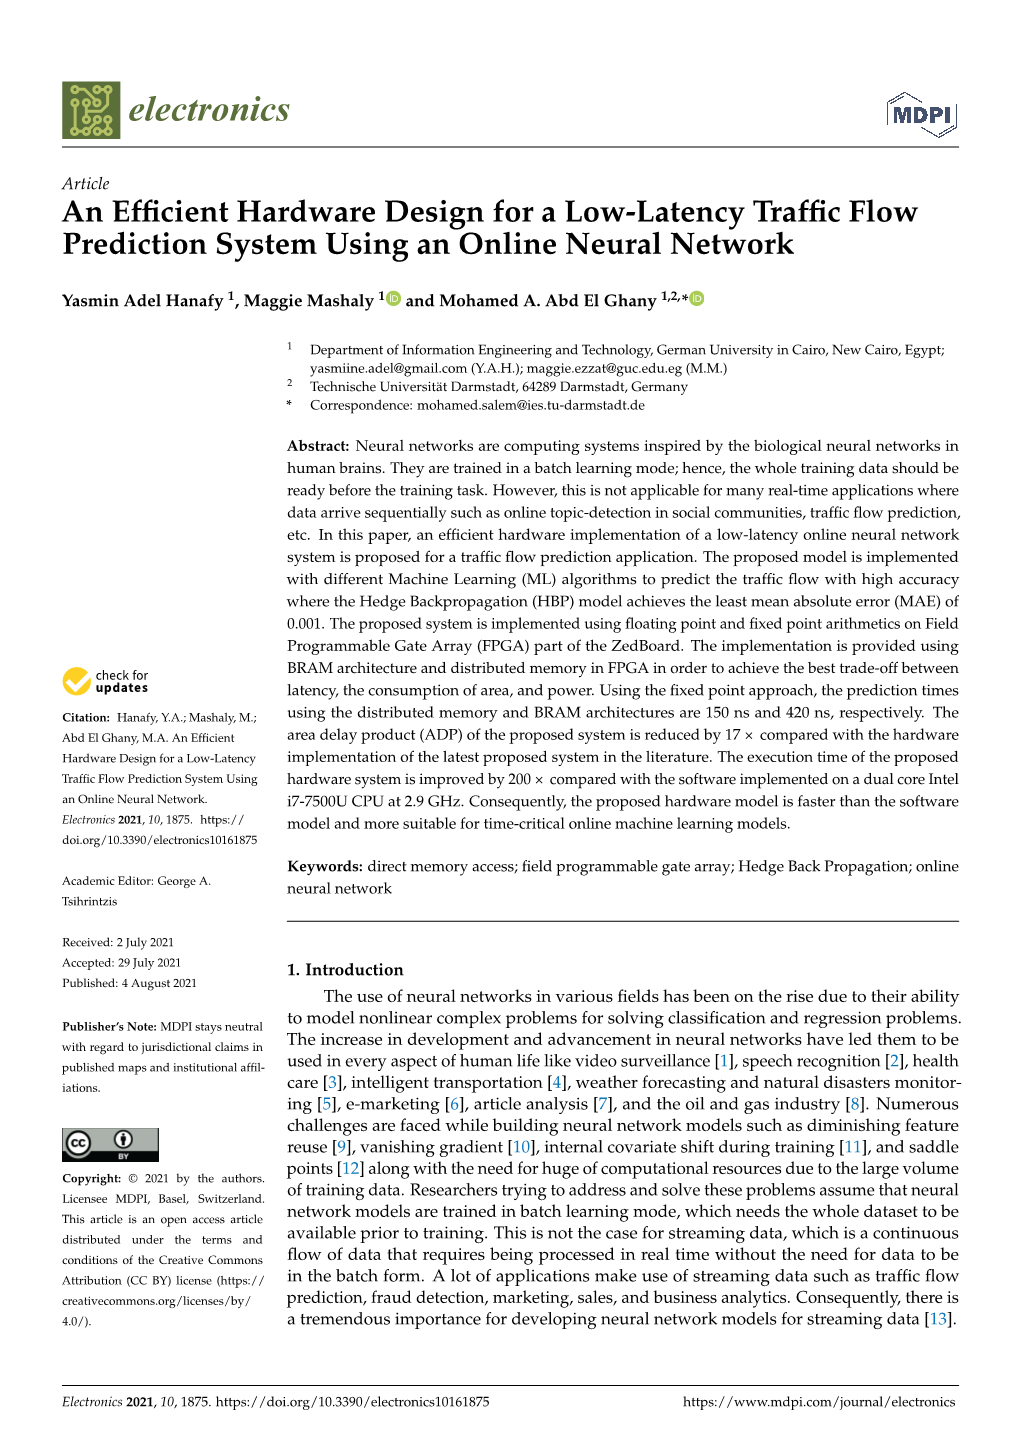 An Efficient Hardware Design for a Low-Latency Traffic Flow Prediction